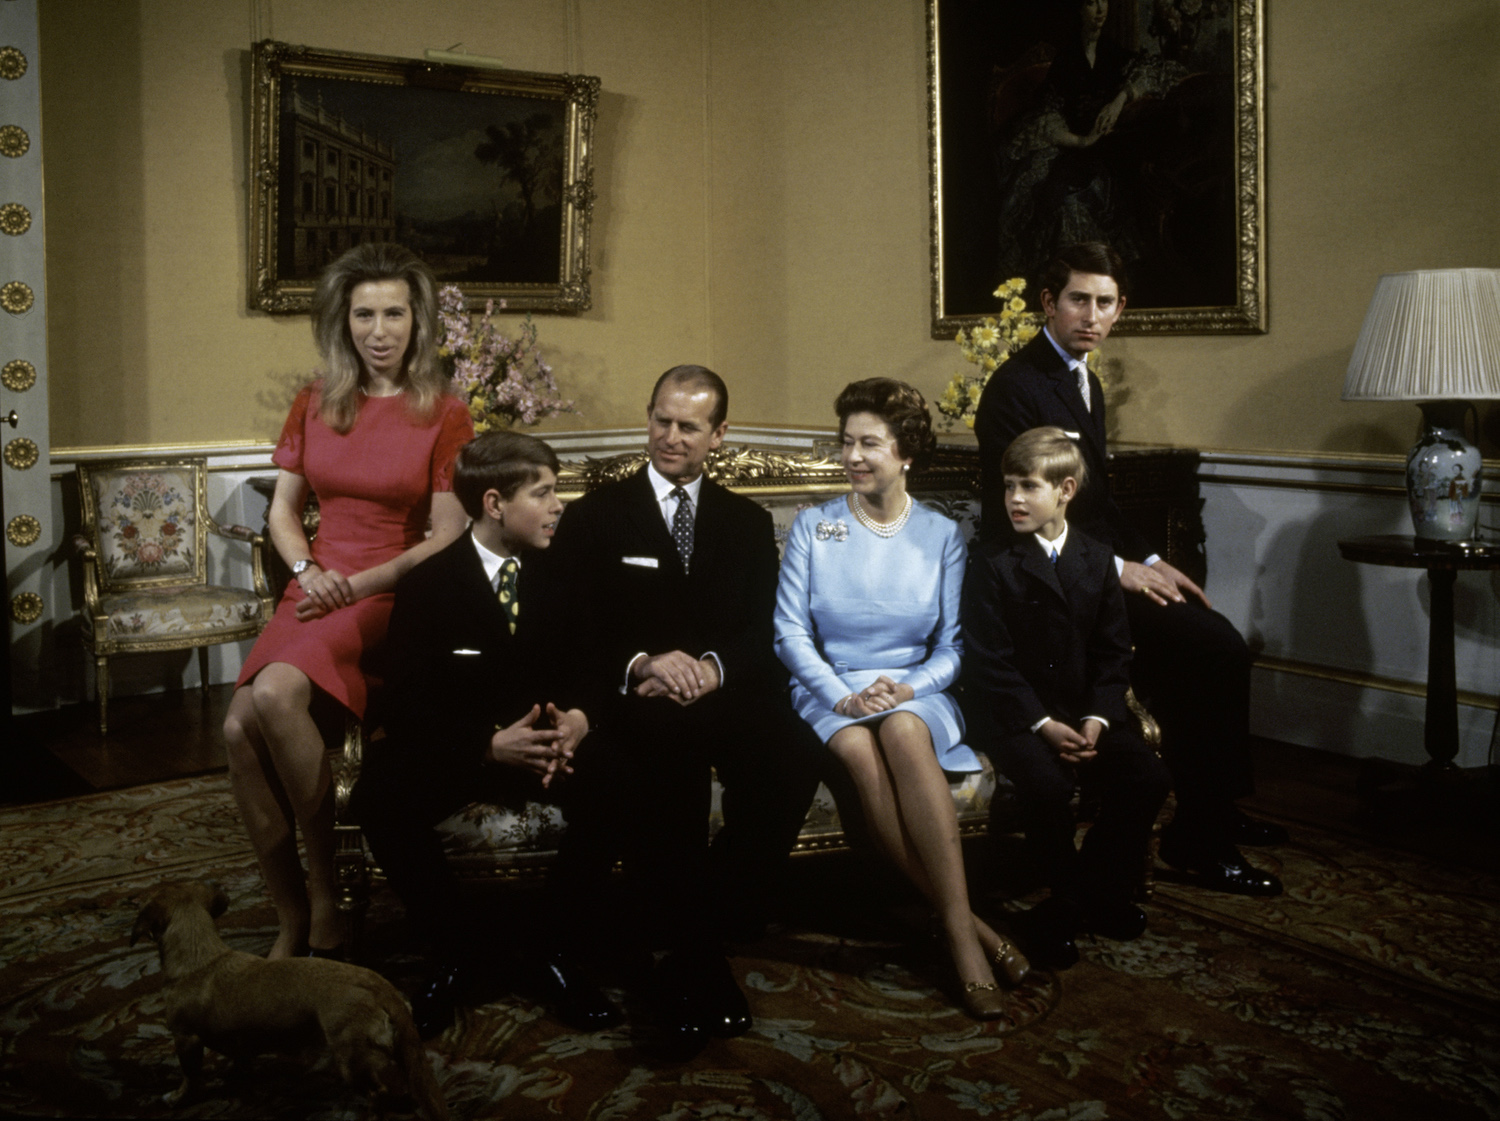 The Queen's family in 1972